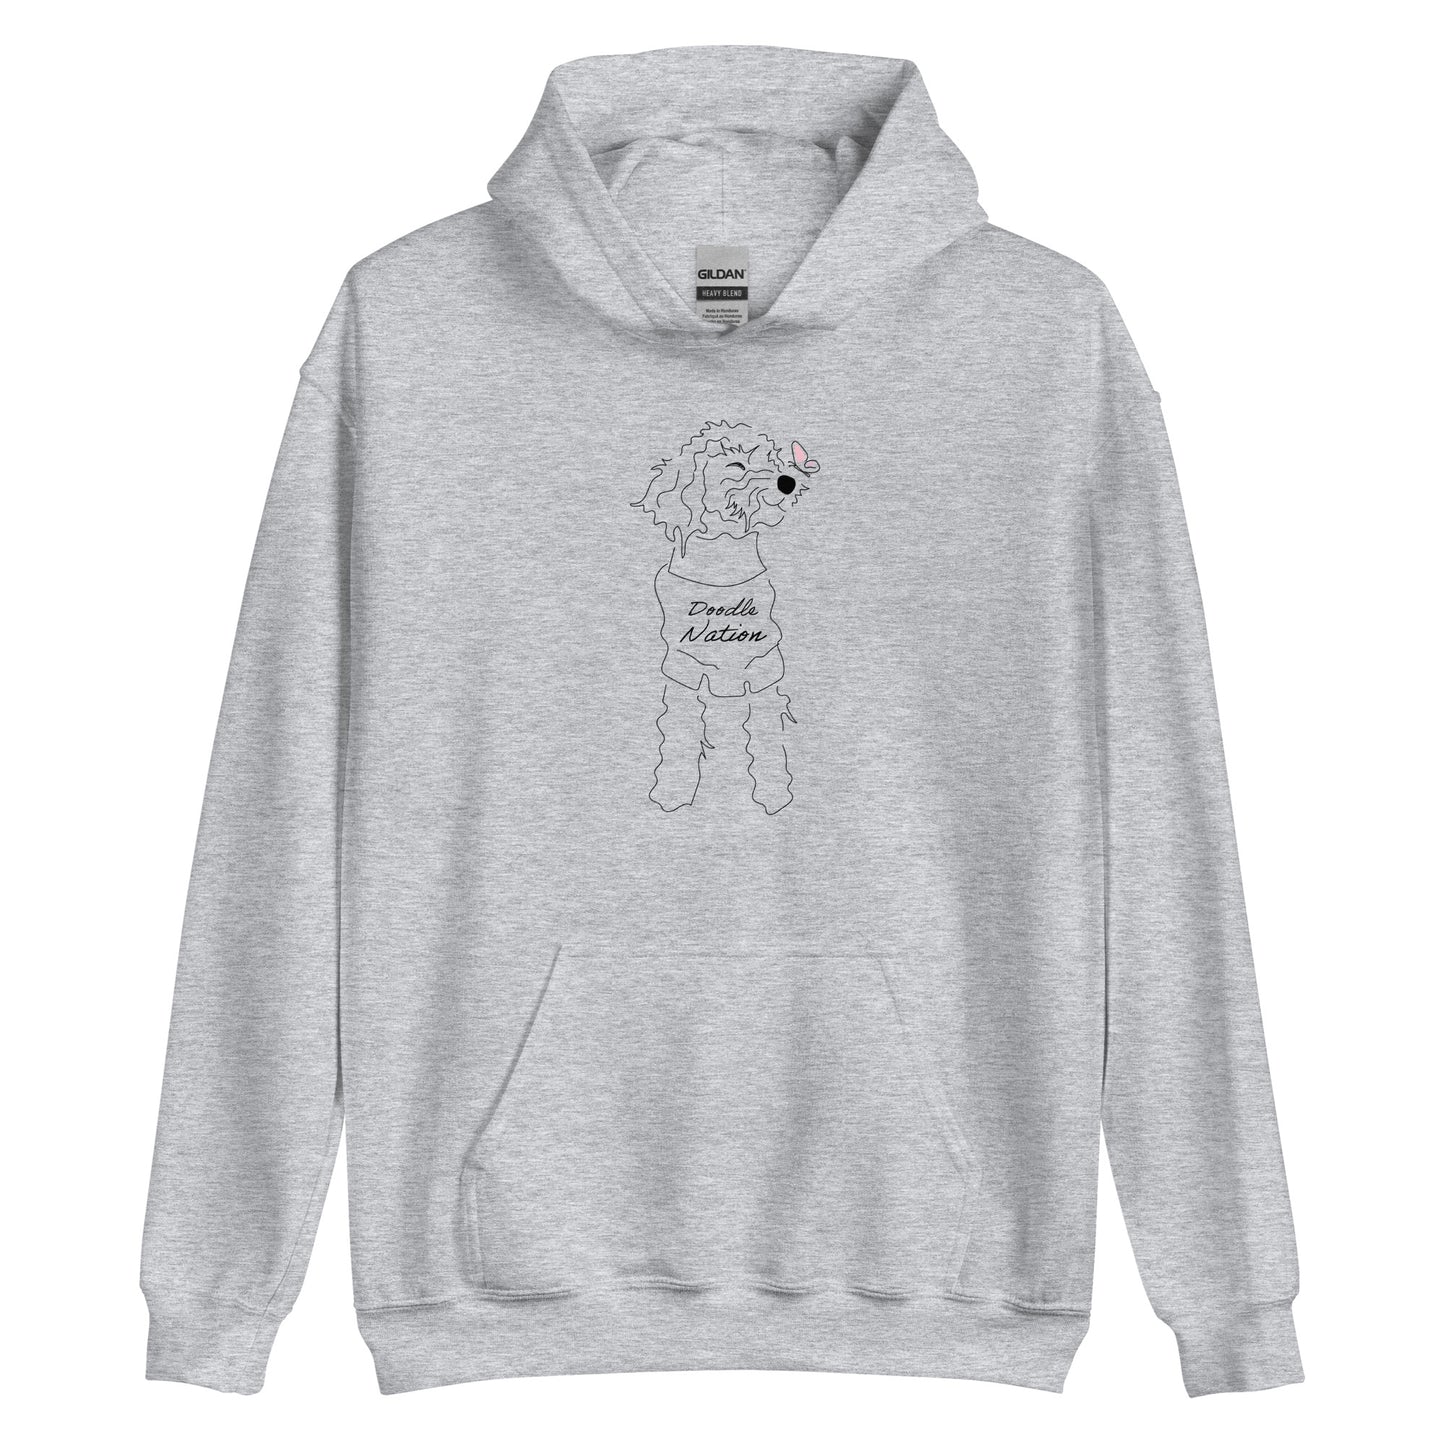 Goldendoodle hoodie with Goldendoodle dog face and words "Doodle Nation" in gray color